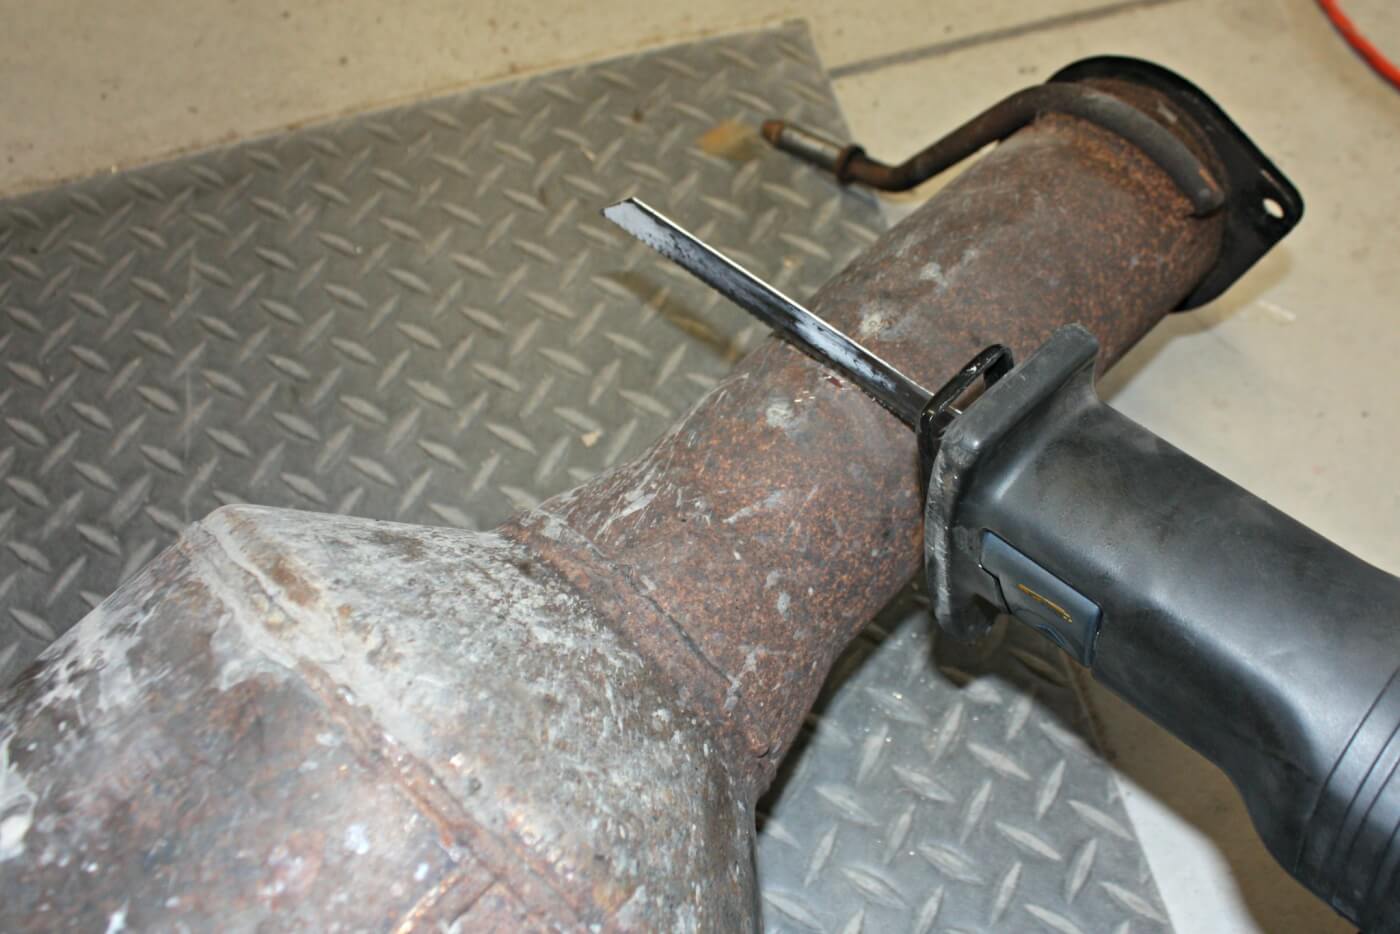 7. The Banks Monster Exhaust will retain the factory catalytic converter, however, one end will need to be cut off to make an easier and higher-flowing connection point to the rest of the 4” system.